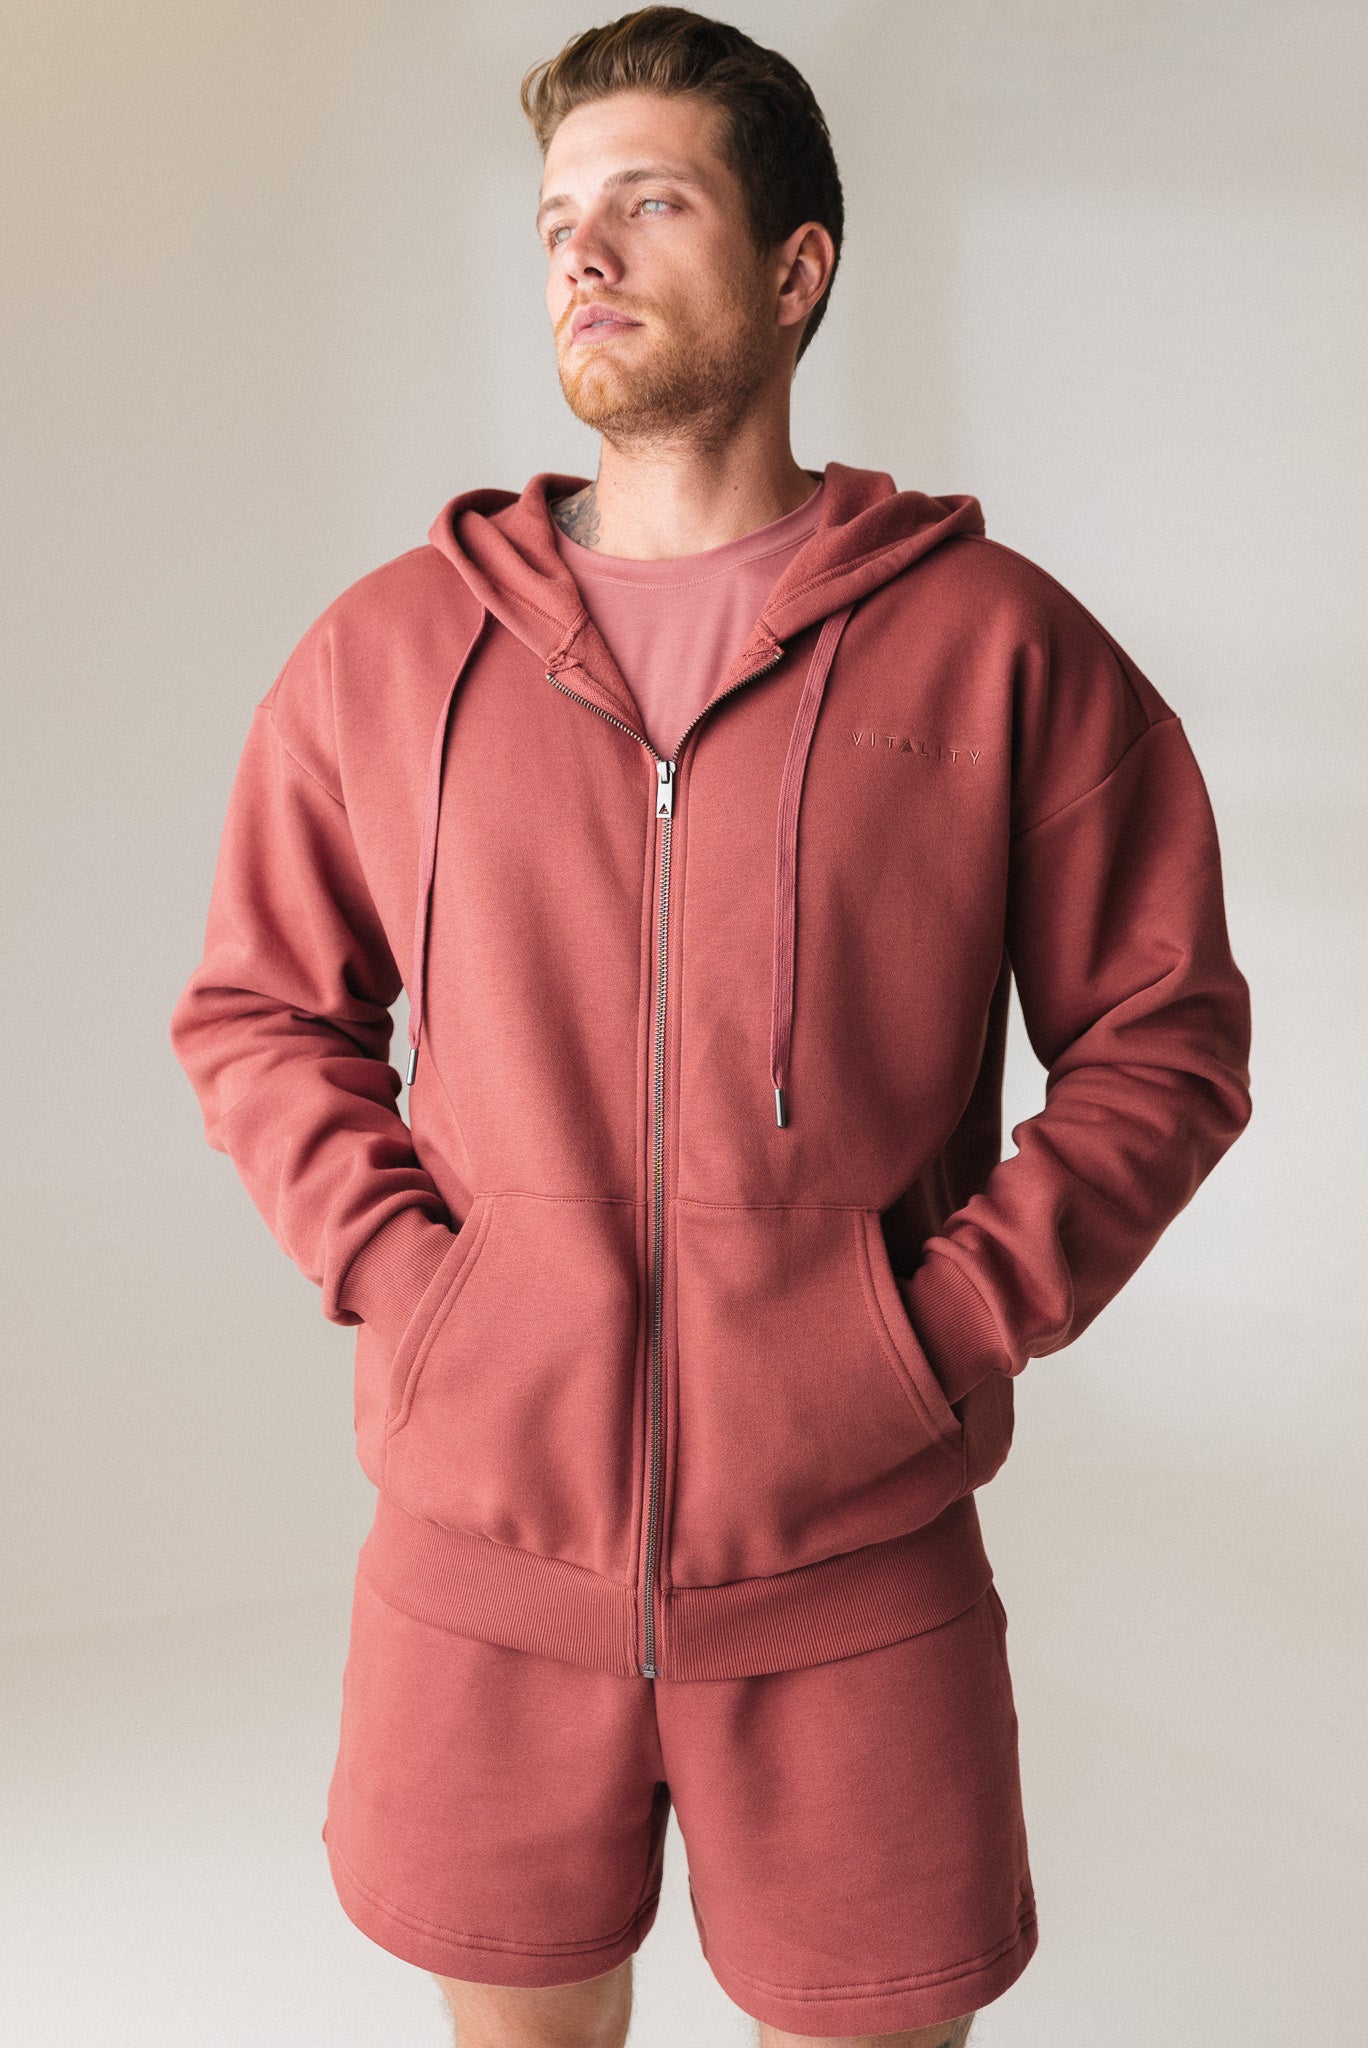 A man wearing the Vitality Uni Cozy Zip in Rosewood